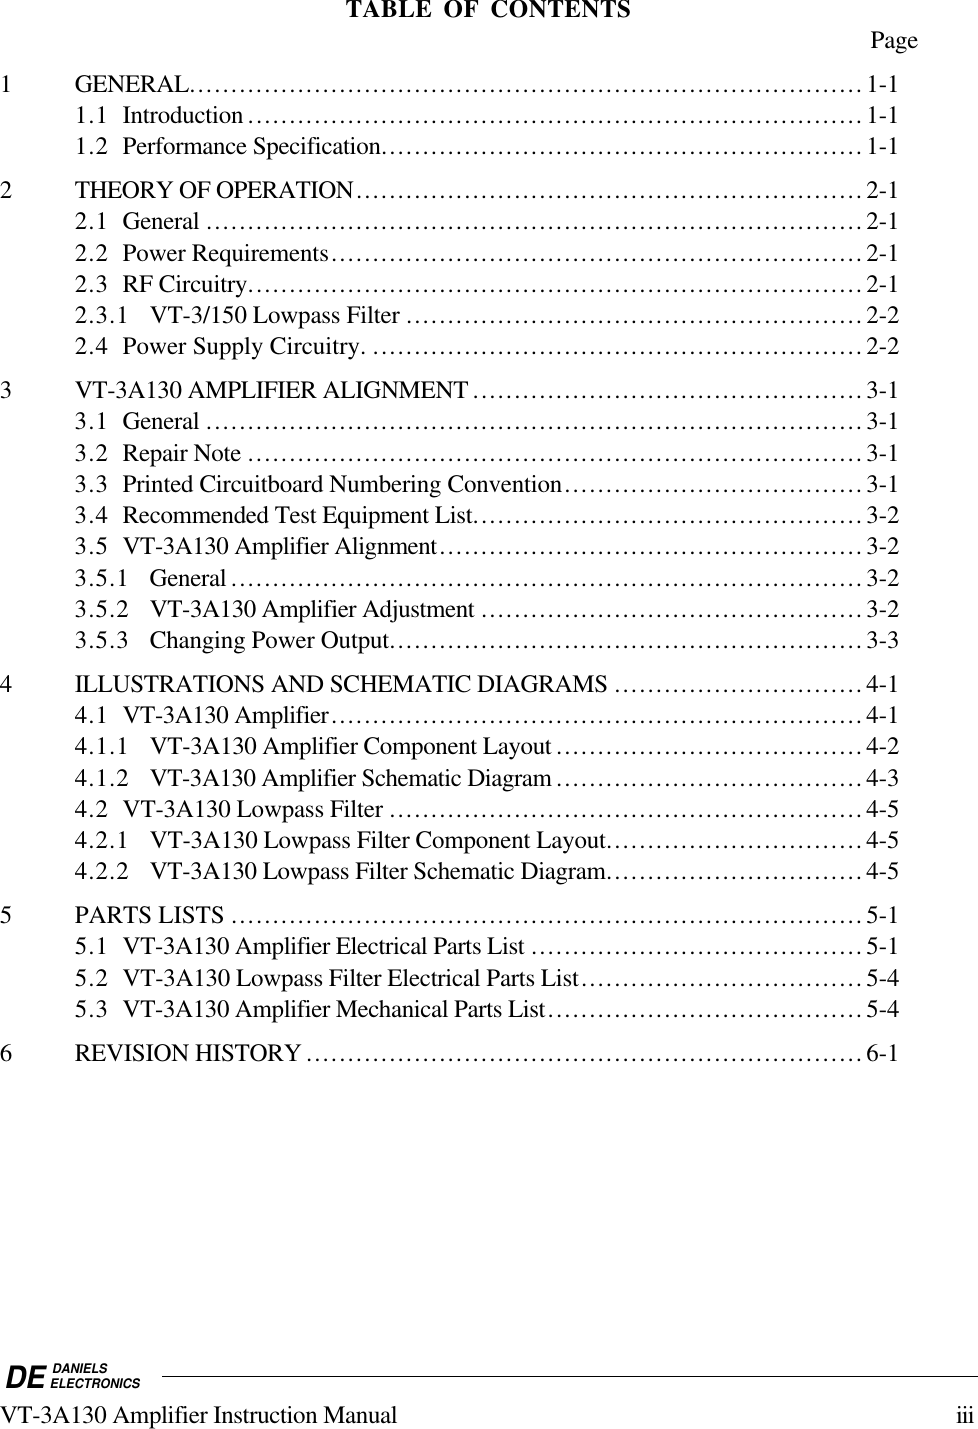 DE DANIELSELECTRONICSVT-3A130 Amplifier Instruction Manual iiiTABLE OF CONTENTS Page1 GENERAL.................................................................................1-11.1 Introduction ..........................................................................1-11.2 Performance Specification..........................................................1-12 THEORY OF OPERATION.............................................................2-12.1 General ...............................................................................2-12.2 Power Requirements................................................................2-12.3 RF Circuitry..........................................................................2-12.3.1 VT-3/150 Lowpass Filter .......................................................2-22.4 Power Supply Circuitry. ...........................................................2-23 VT-3A130 AMPLIFIER ALIGNMENT ...............................................3-13.1 General ...............................................................................3-13.2 Repair Note ..........................................................................3-13.3 Printed Circuitboard Numbering Convention....................................3-13.4 Recommended Test Equipment List...............................................3-23.5 VT-3A130 Amplifier Alignment...................................................3-23.5.1 General ............................................................................3-23.5.2 VT-3A130 Amplifier Adjustment ..............................................3-23.5.3 Changing Power Output.........................................................3-34 ILLUSTRATIONS AND SCHEMATIC DIAGRAMS ..............................4-14.1 VT-3A130 Amplifier................................................................4-14.1.1 VT-3A130 Amplifier Component Layout .....................................4-24.1.2 VT-3A130 Amplifier Schematic Diagram .....................................4-34.2 VT-3A130 Lowpass Filter .........................................................4-54.2.1 VT-3A130 Lowpass Filter Component Layout...............................4-54.2.2 VT-3A130 Lowpass Filter Schematic Diagram...............................4-55 PARTS LISTS ............................................................................5-15.1 VT-3A130 Amplifier Electrical Parts List ........................................5-15.2 VT-3A130 Lowpass Filter Electrical Parts List..................................5-45.3 VT-3A130 Amplifier Mechanical Parts List......................................5-46 REVISION HISTORY ...................................................................6-1